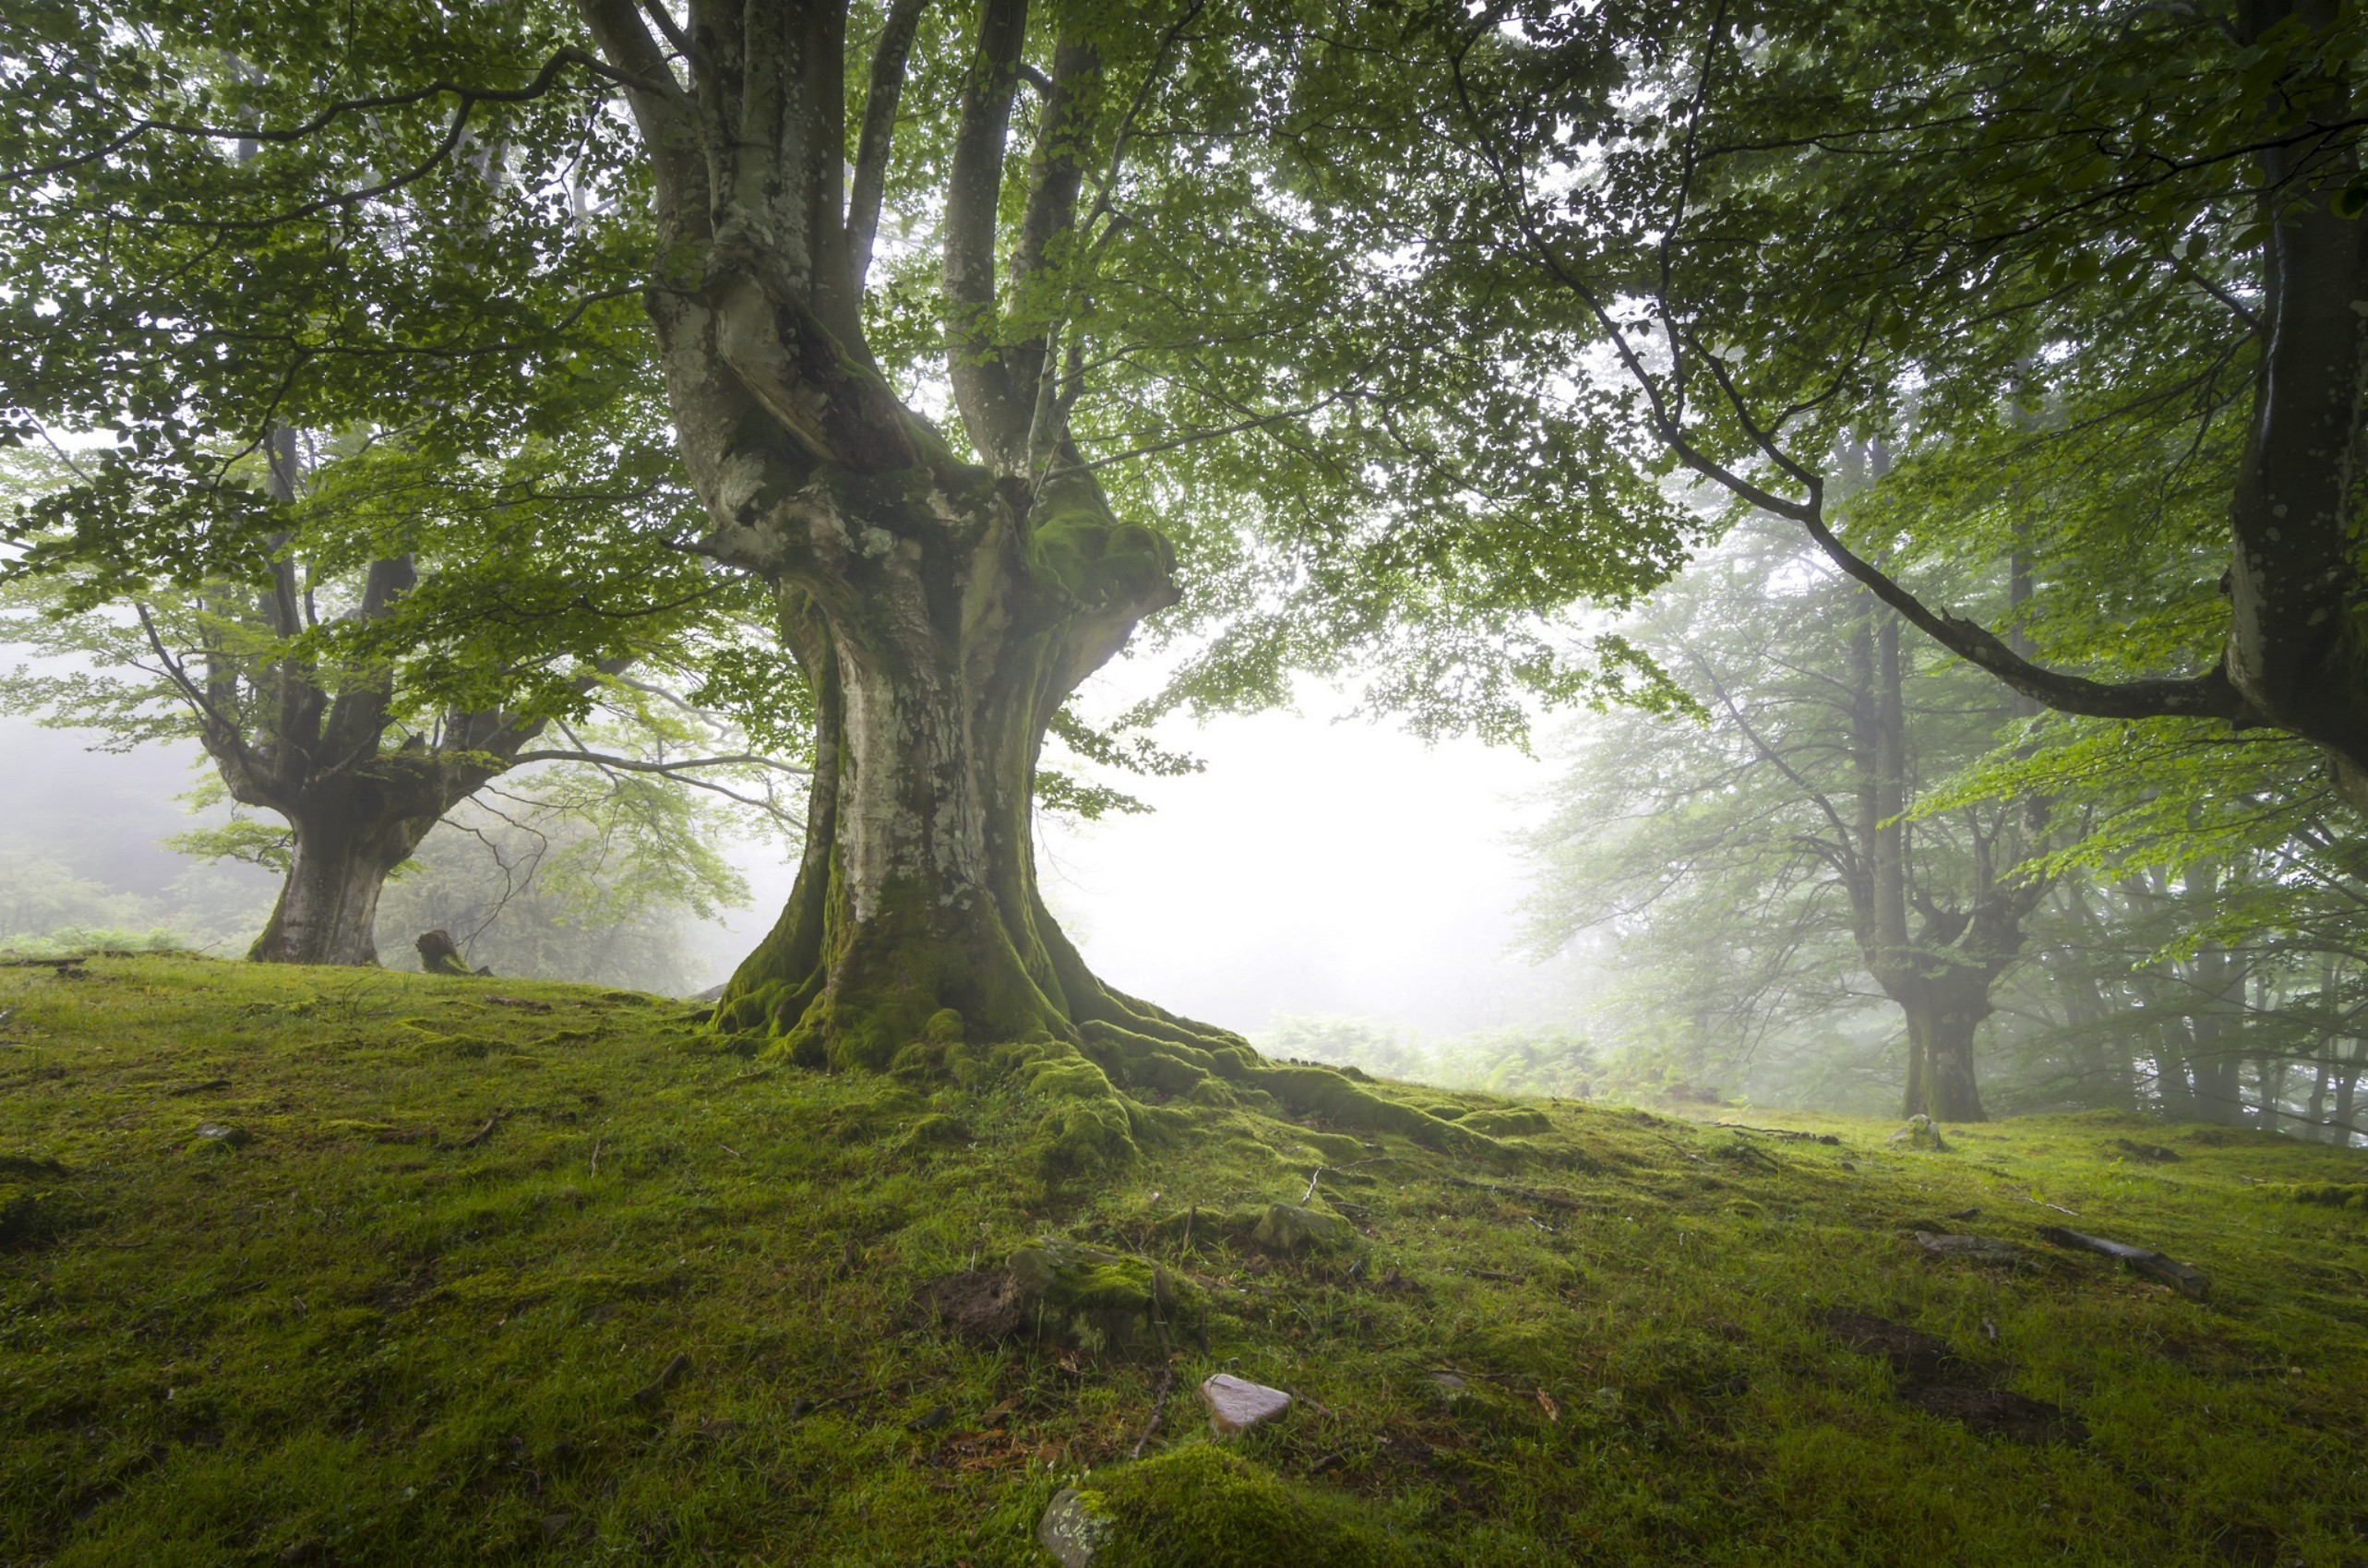 General 2566x1699 trees nature mist moss foliage plants outdoors